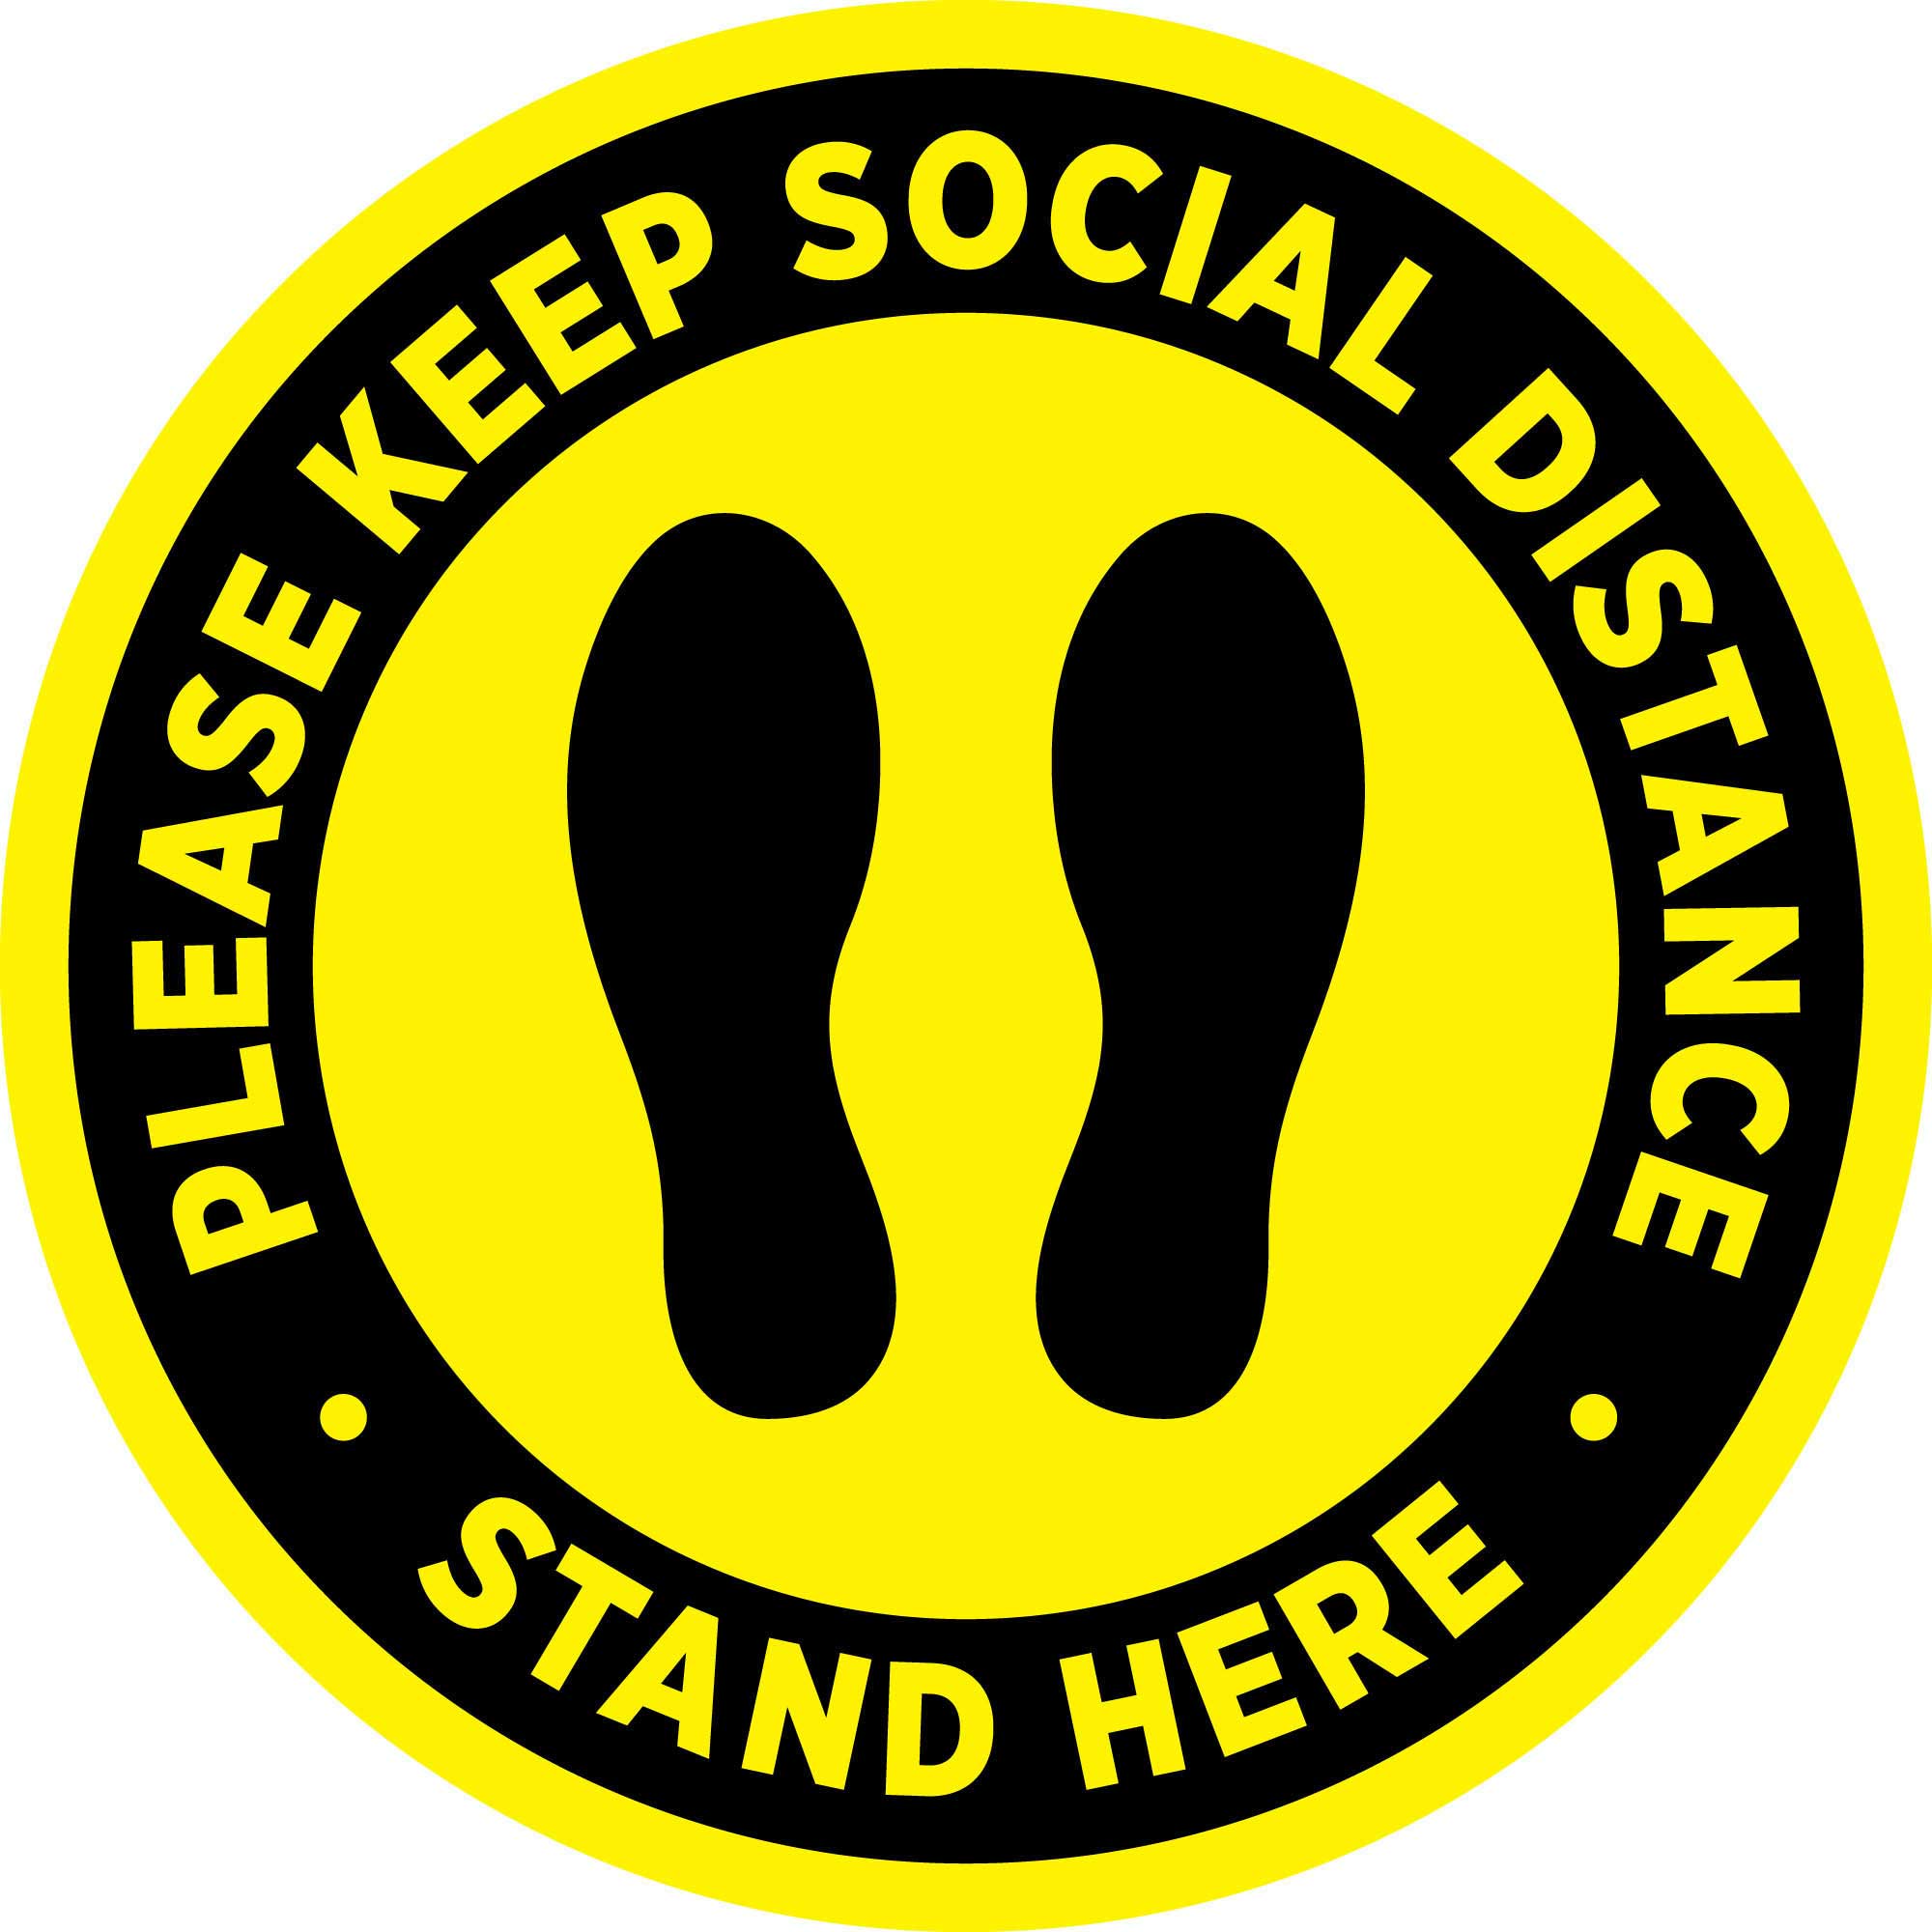 Please keep your distance Stand here floor sticker decal bulk safe social space 